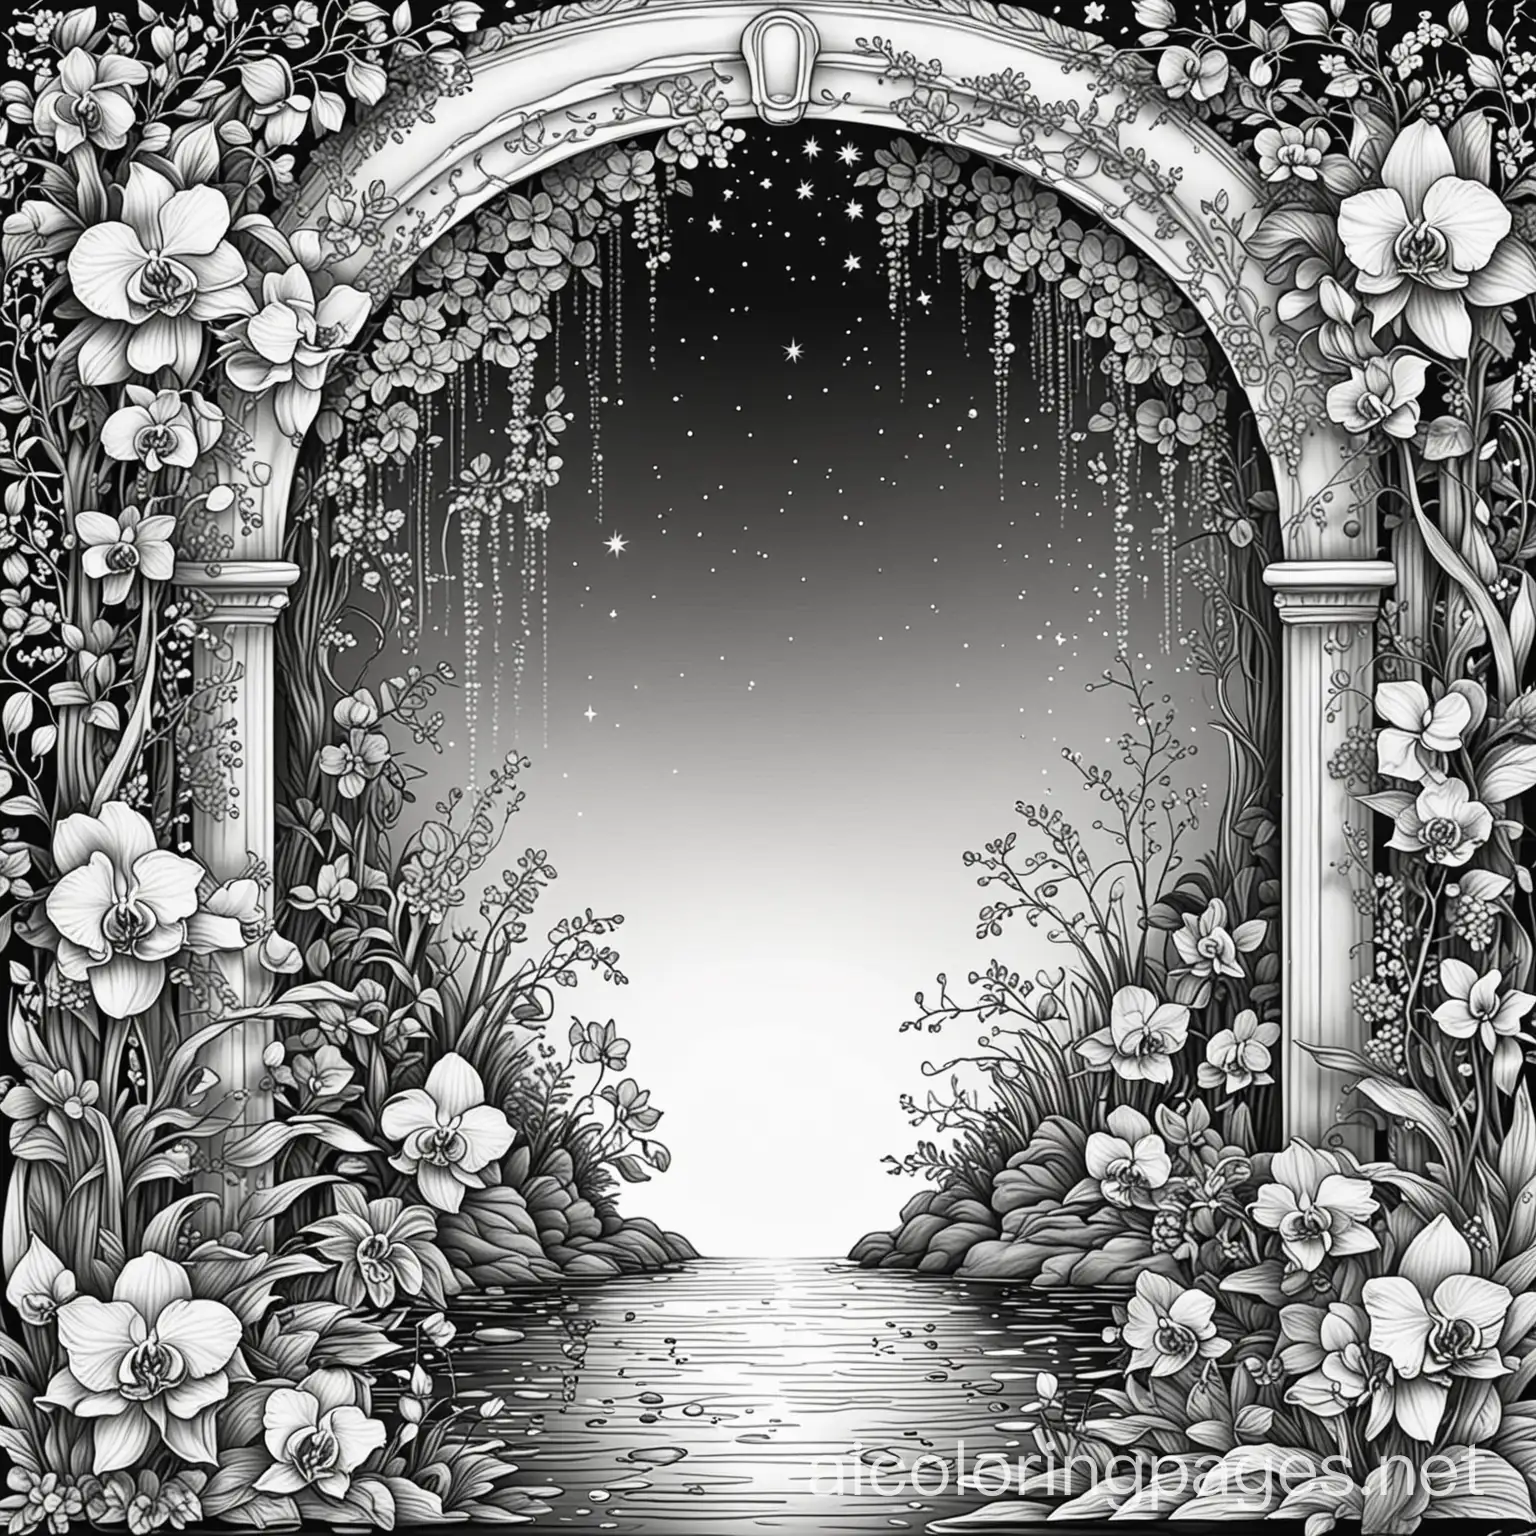 inverted mirror image reverse waterfall under dark night sky with stars bright colors hanging vines exotic flowers orchids roses, Coloring Page, black and white, line art, white background, Simplicity, Ample White Space. The background of the coloring page is plain white to make it easy for young children to color within the lines. The outlines of all the subjects are easy to distinguish, making it simple for kids to color without too much difficulty